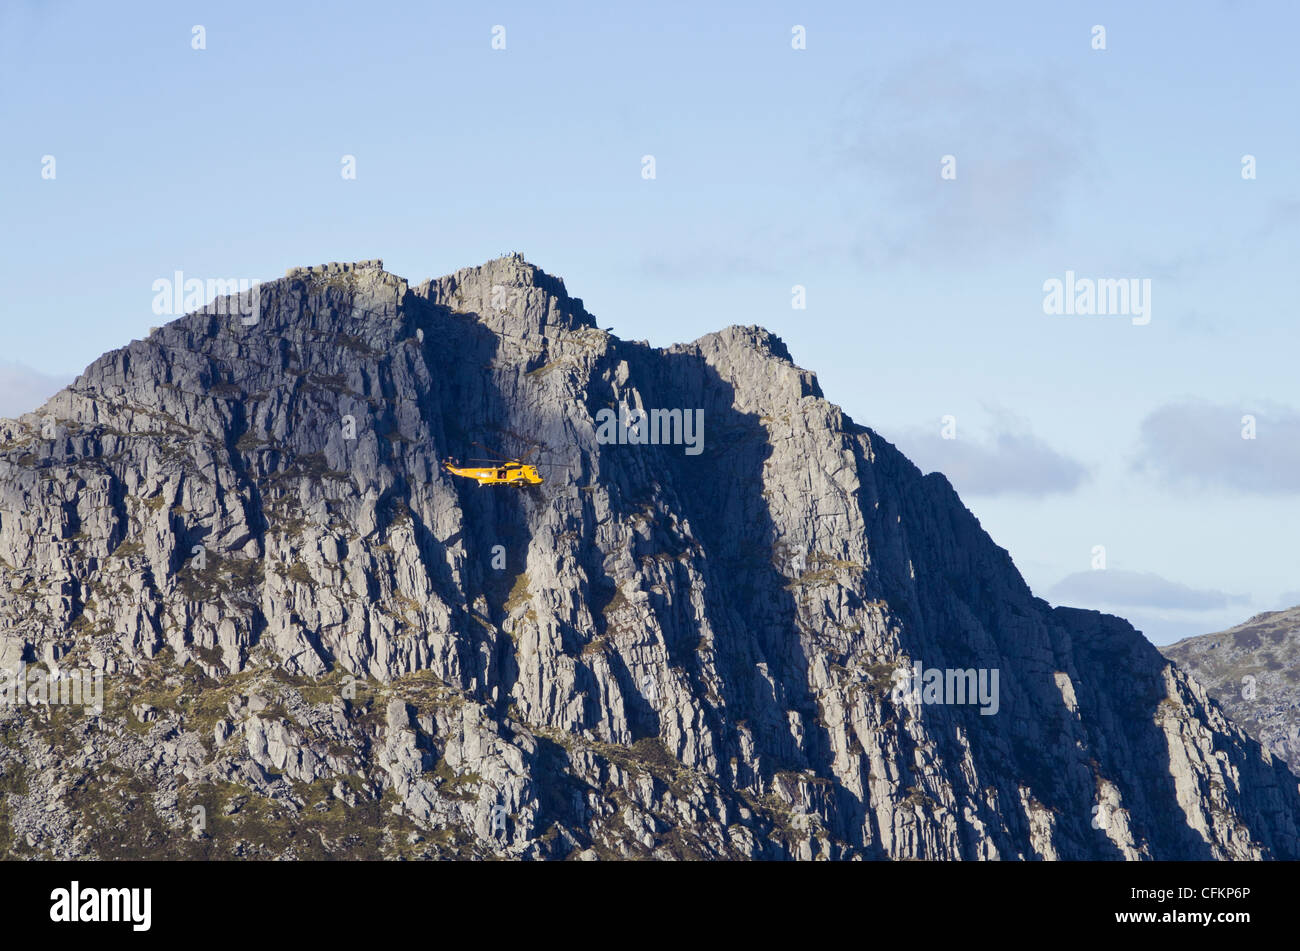 Yellow RAF Seaking rescue helicopter hovering near steep crags of Mt Tryfan east face in mountains of Snowdonia North Wales UK Stock Photo